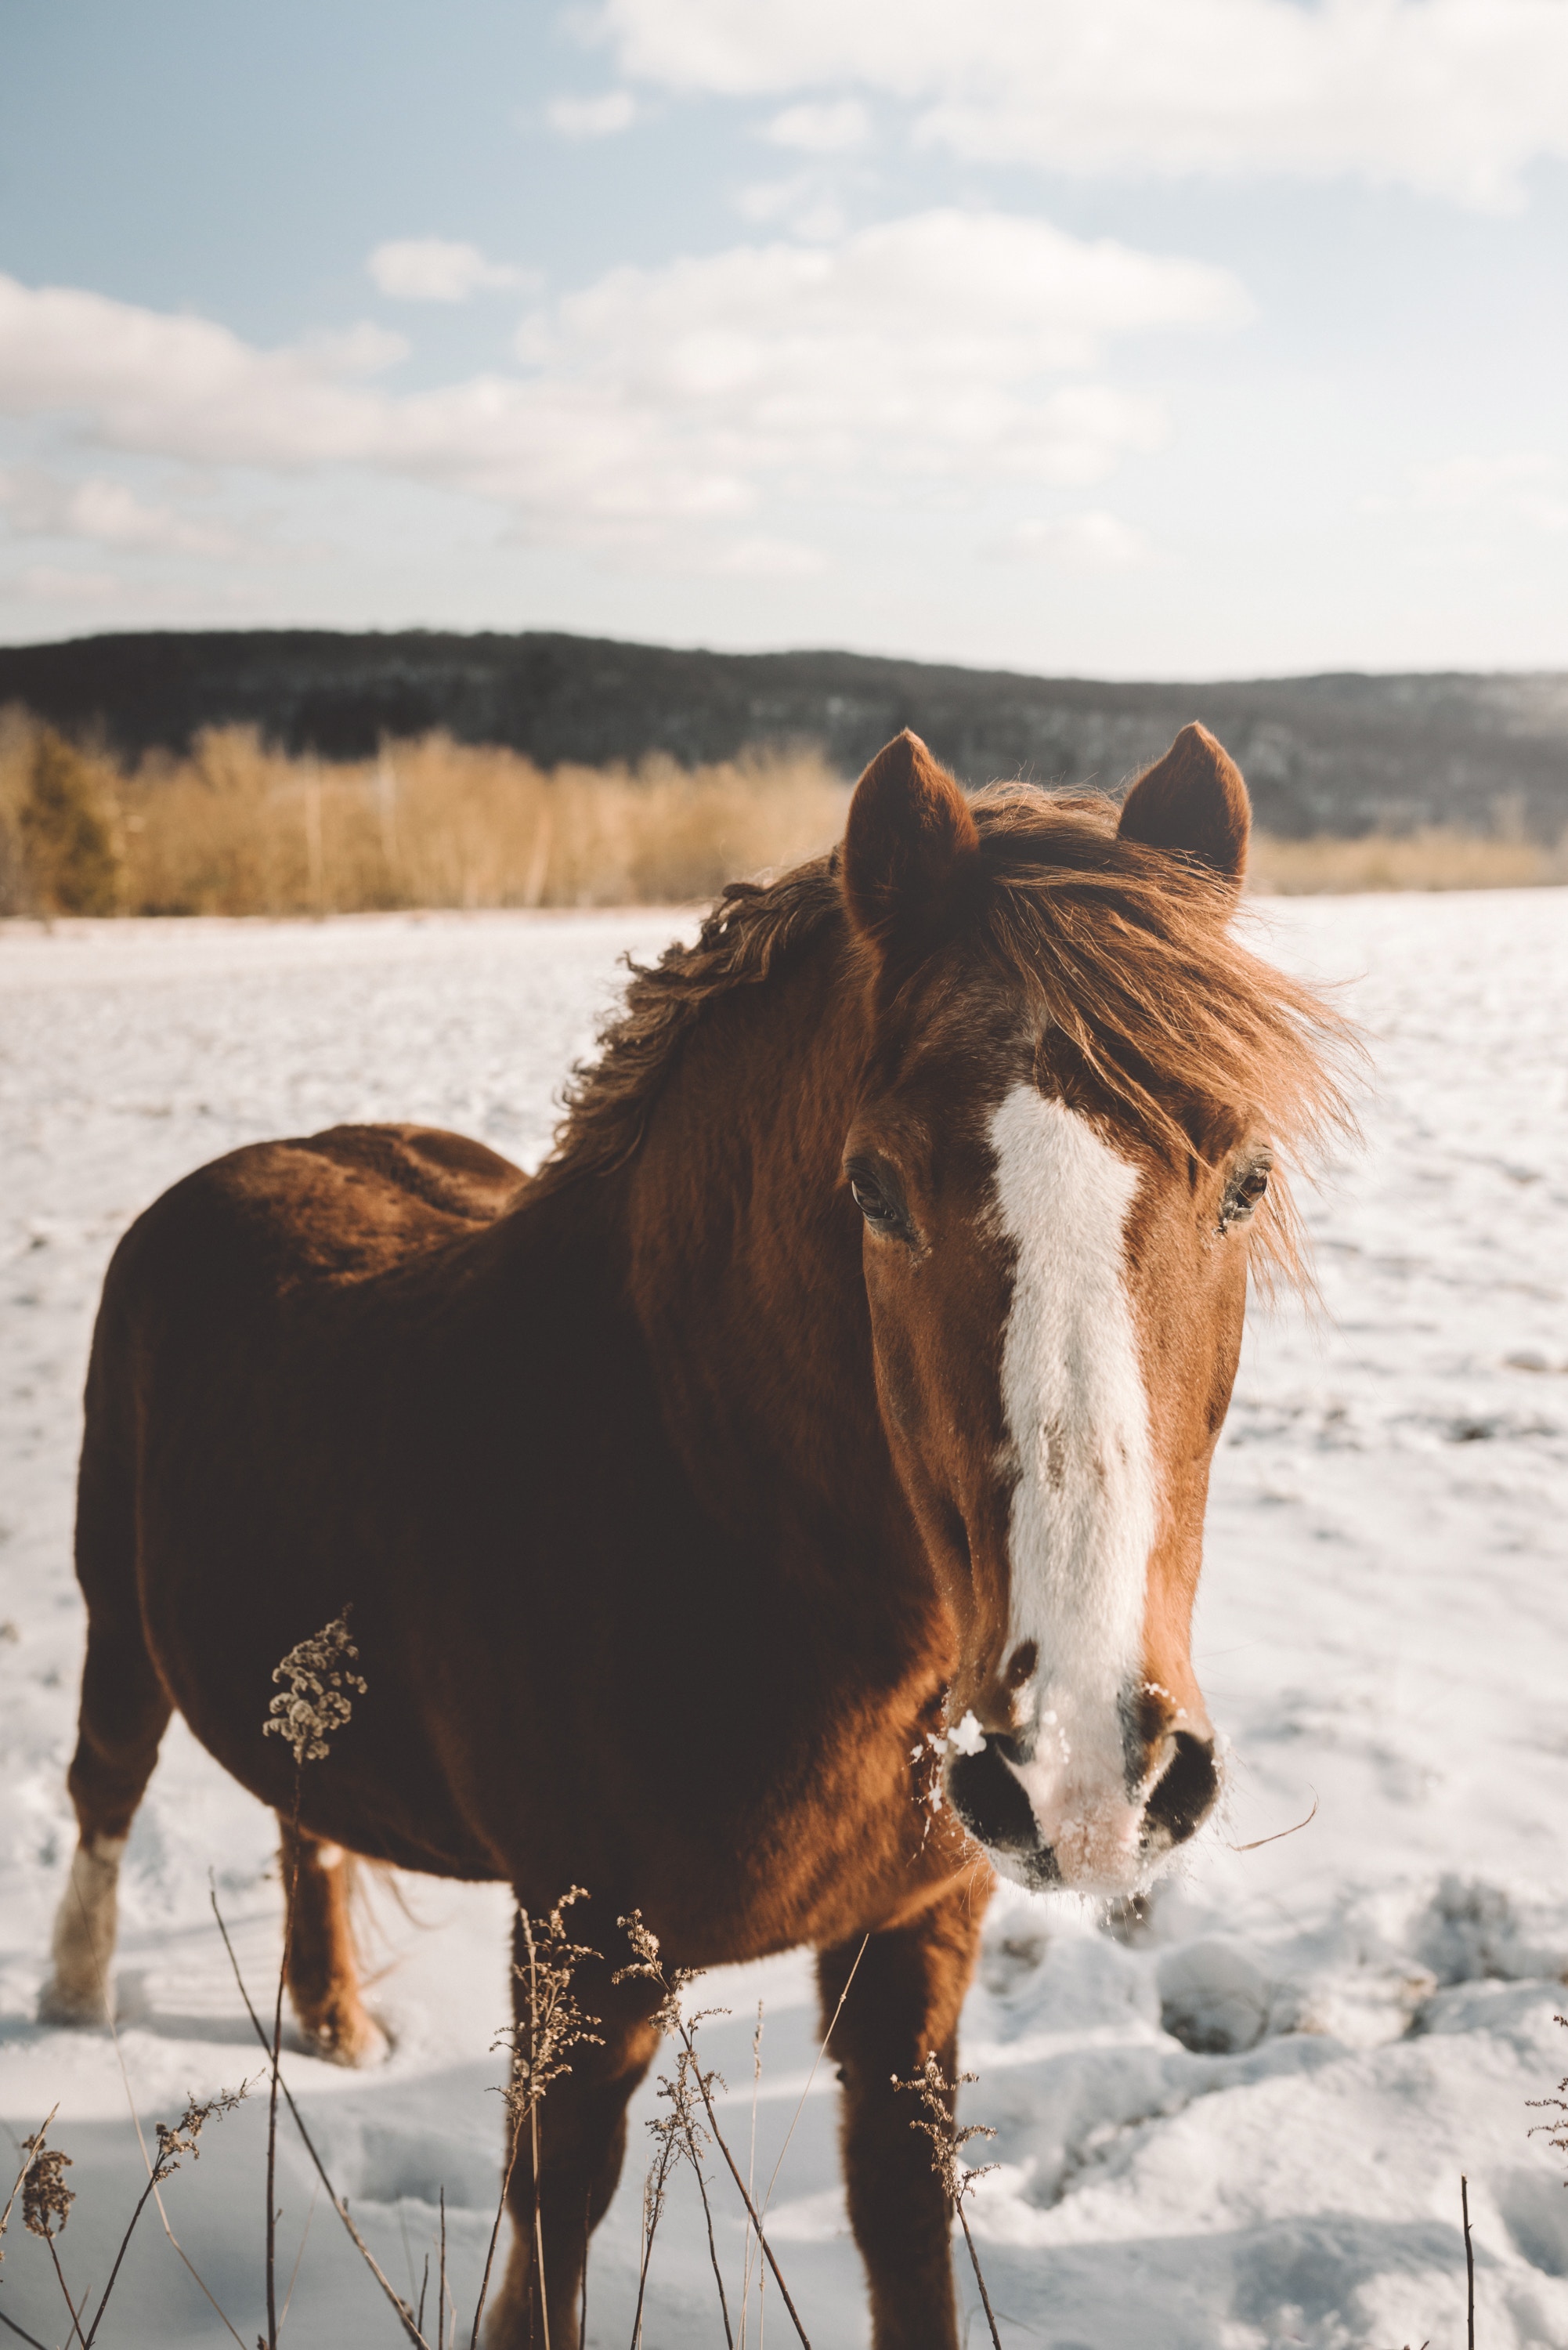 How to Create a Customized Horse De-Worming Schedule